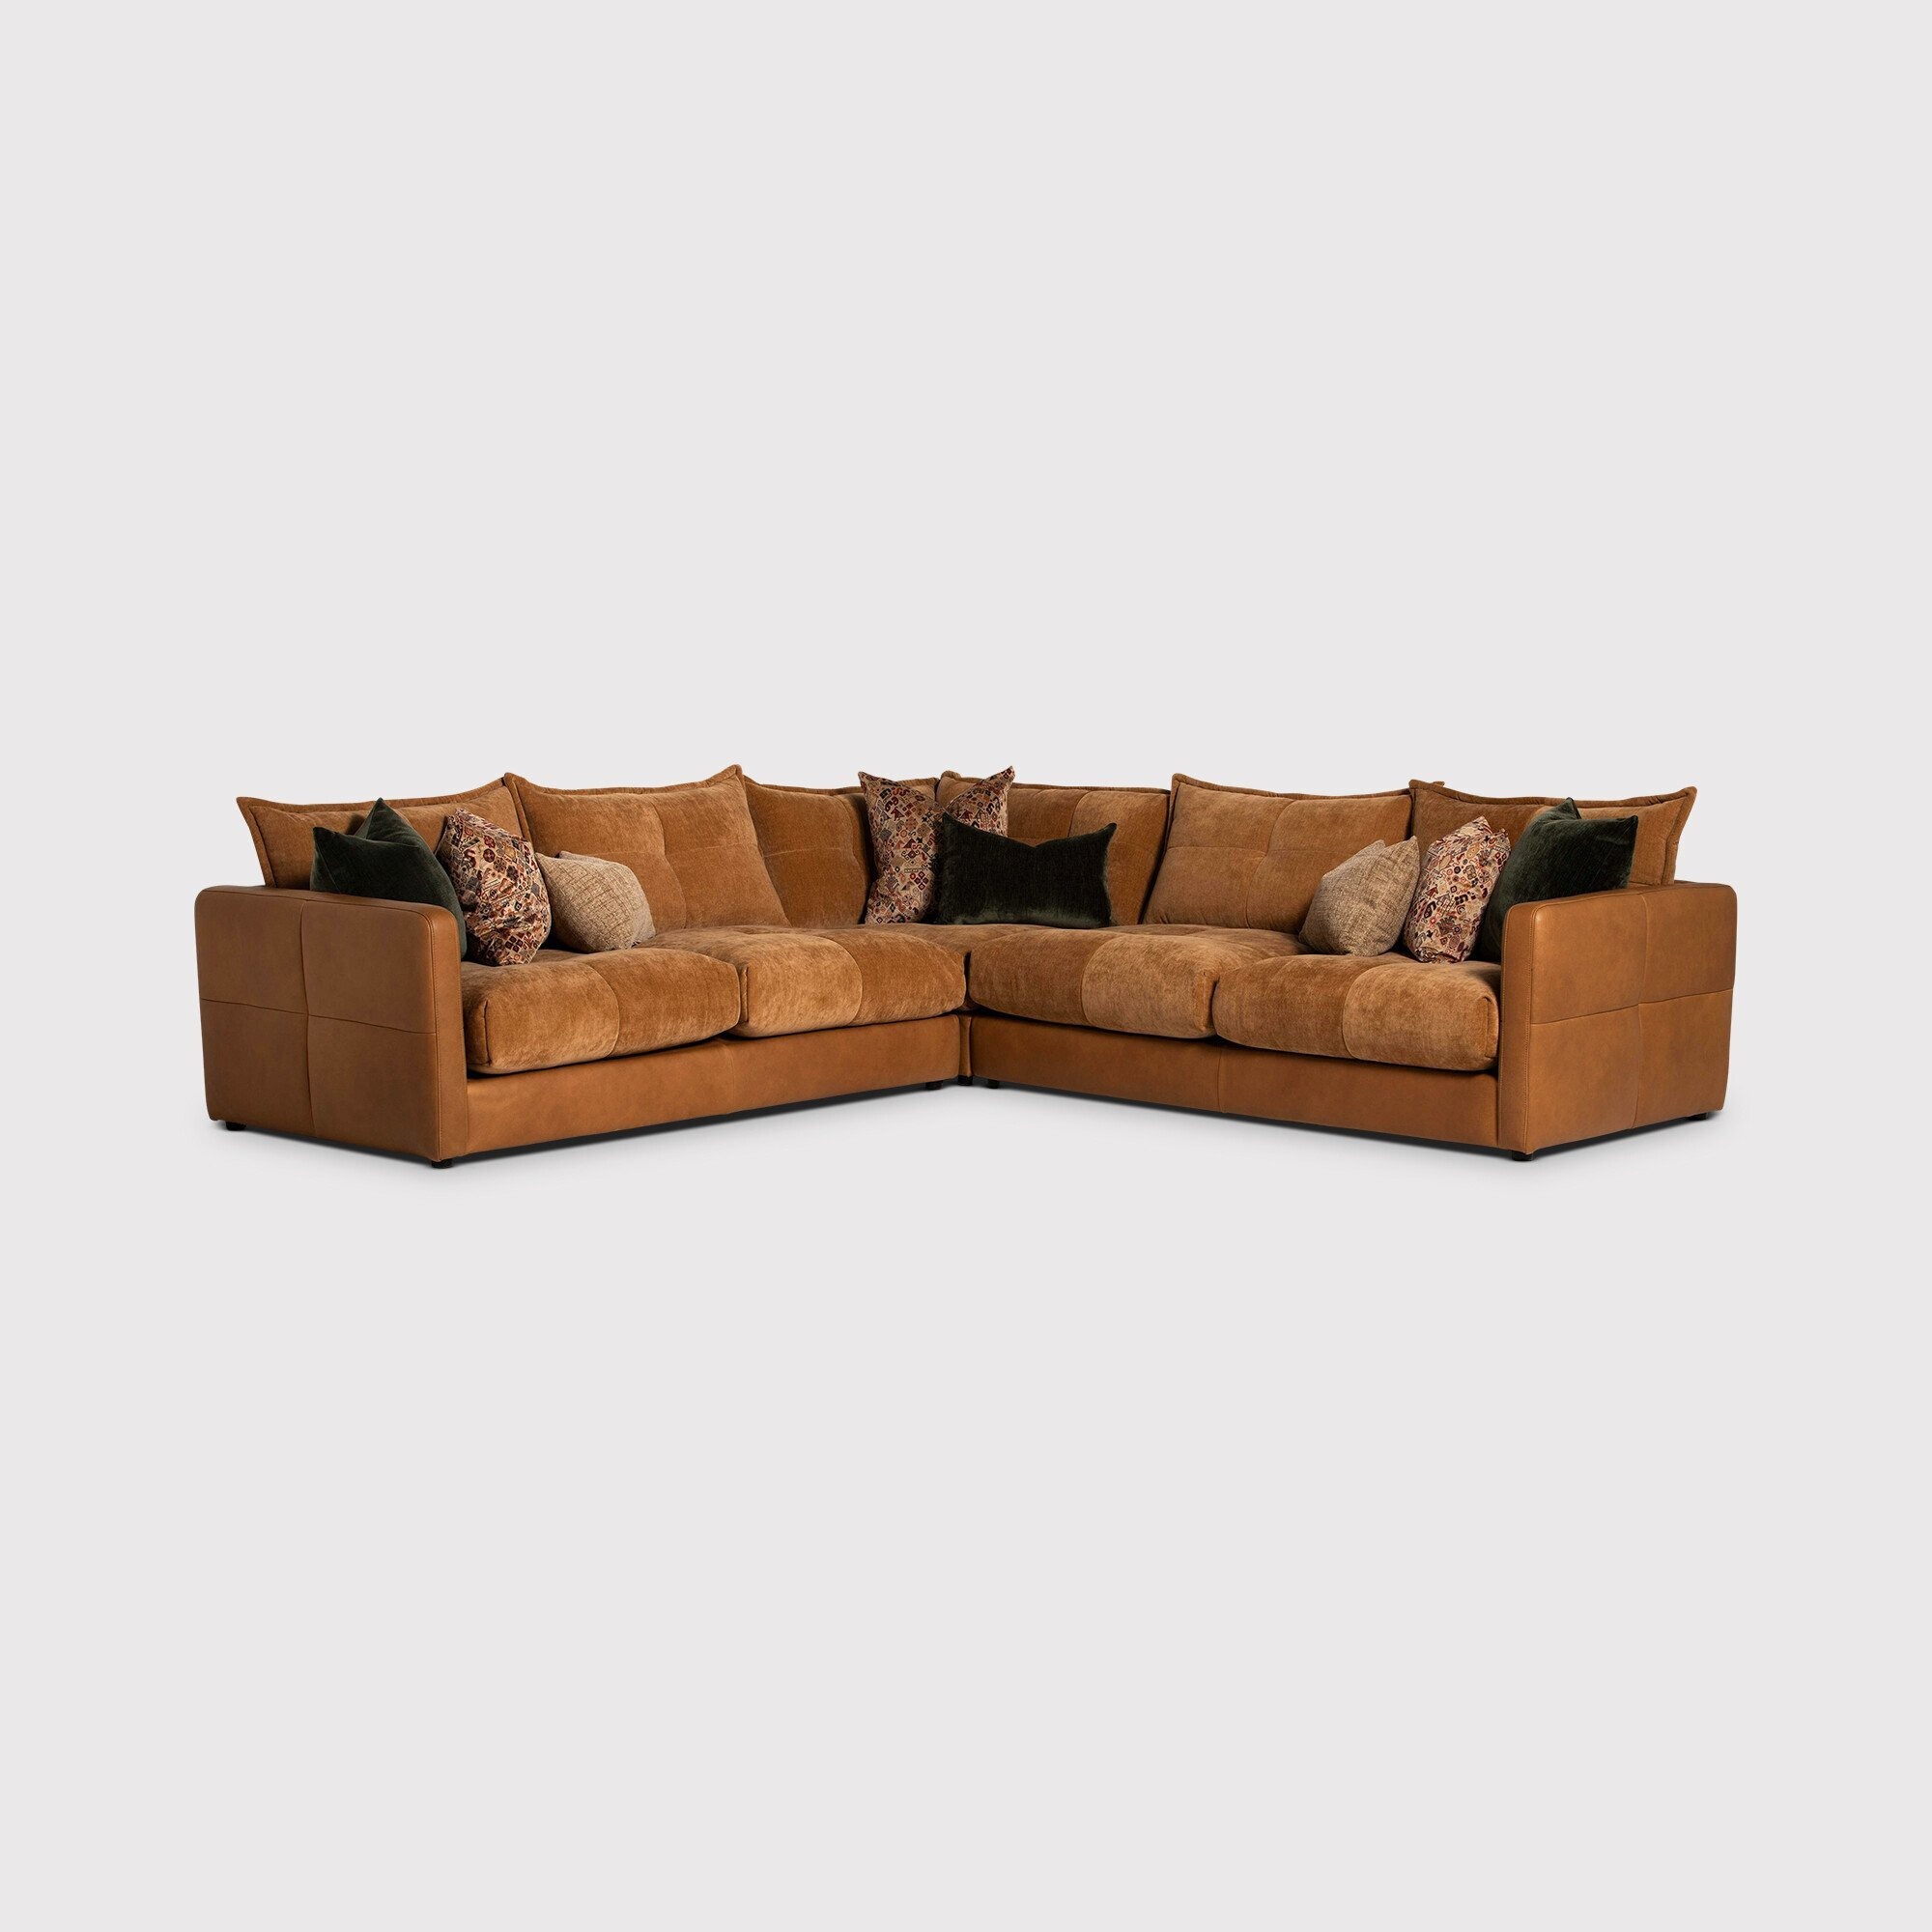 Roby 3 corner 3 Corner Sofa, Brown Fabric & Leather - Barker & Stonehouse - image 1